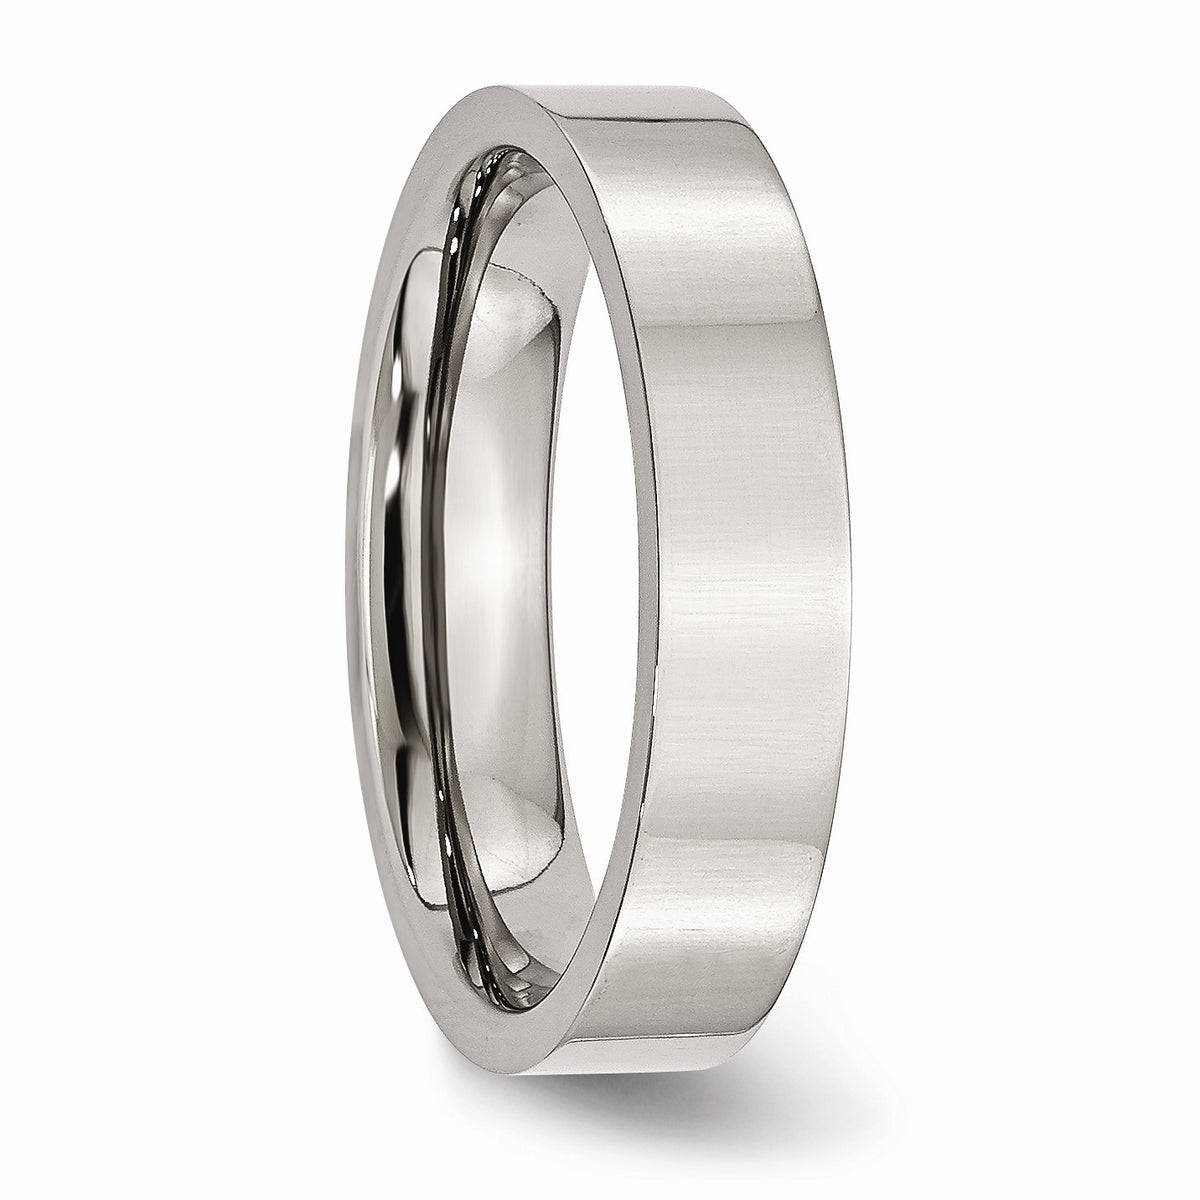 Alternate view of the 5mm Polished Stainless Steel Flat Comfort Fit Wedding Band by The Black Bow Jewelry Co.